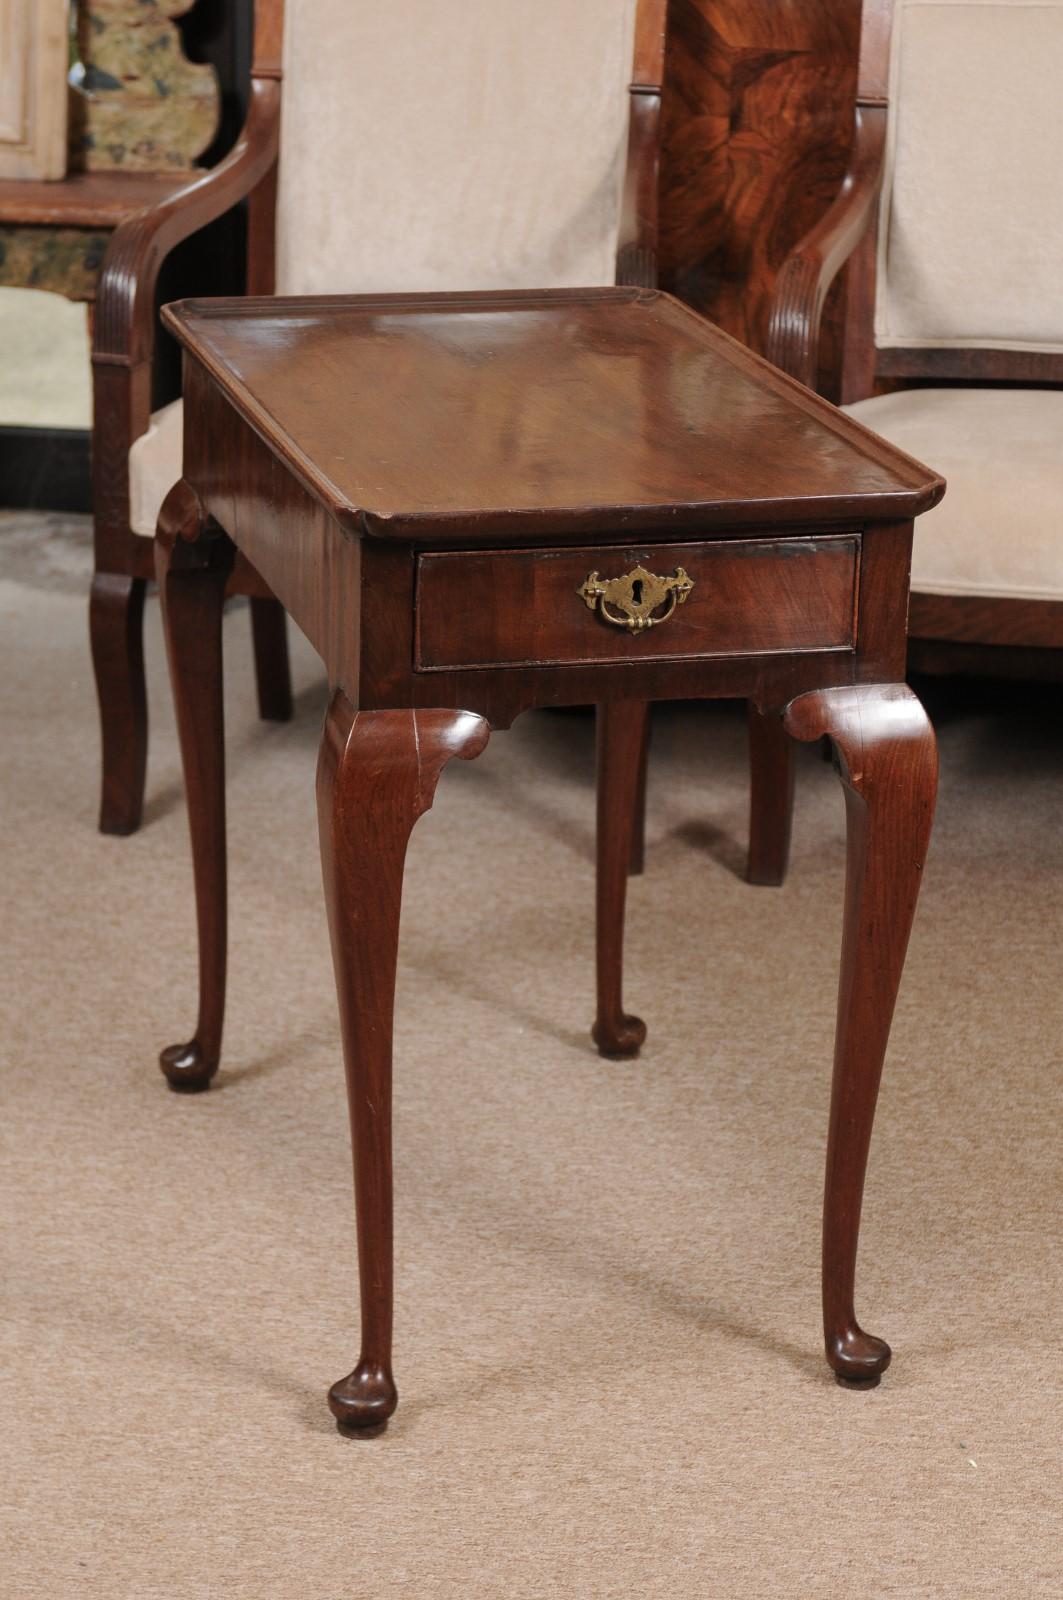 A George II 18th century Mahogany tea table featuring dish top, single drawer in frieze with cock beading boarding the drawer and with brass pull. The legs with cabriole form ending in pad feet.